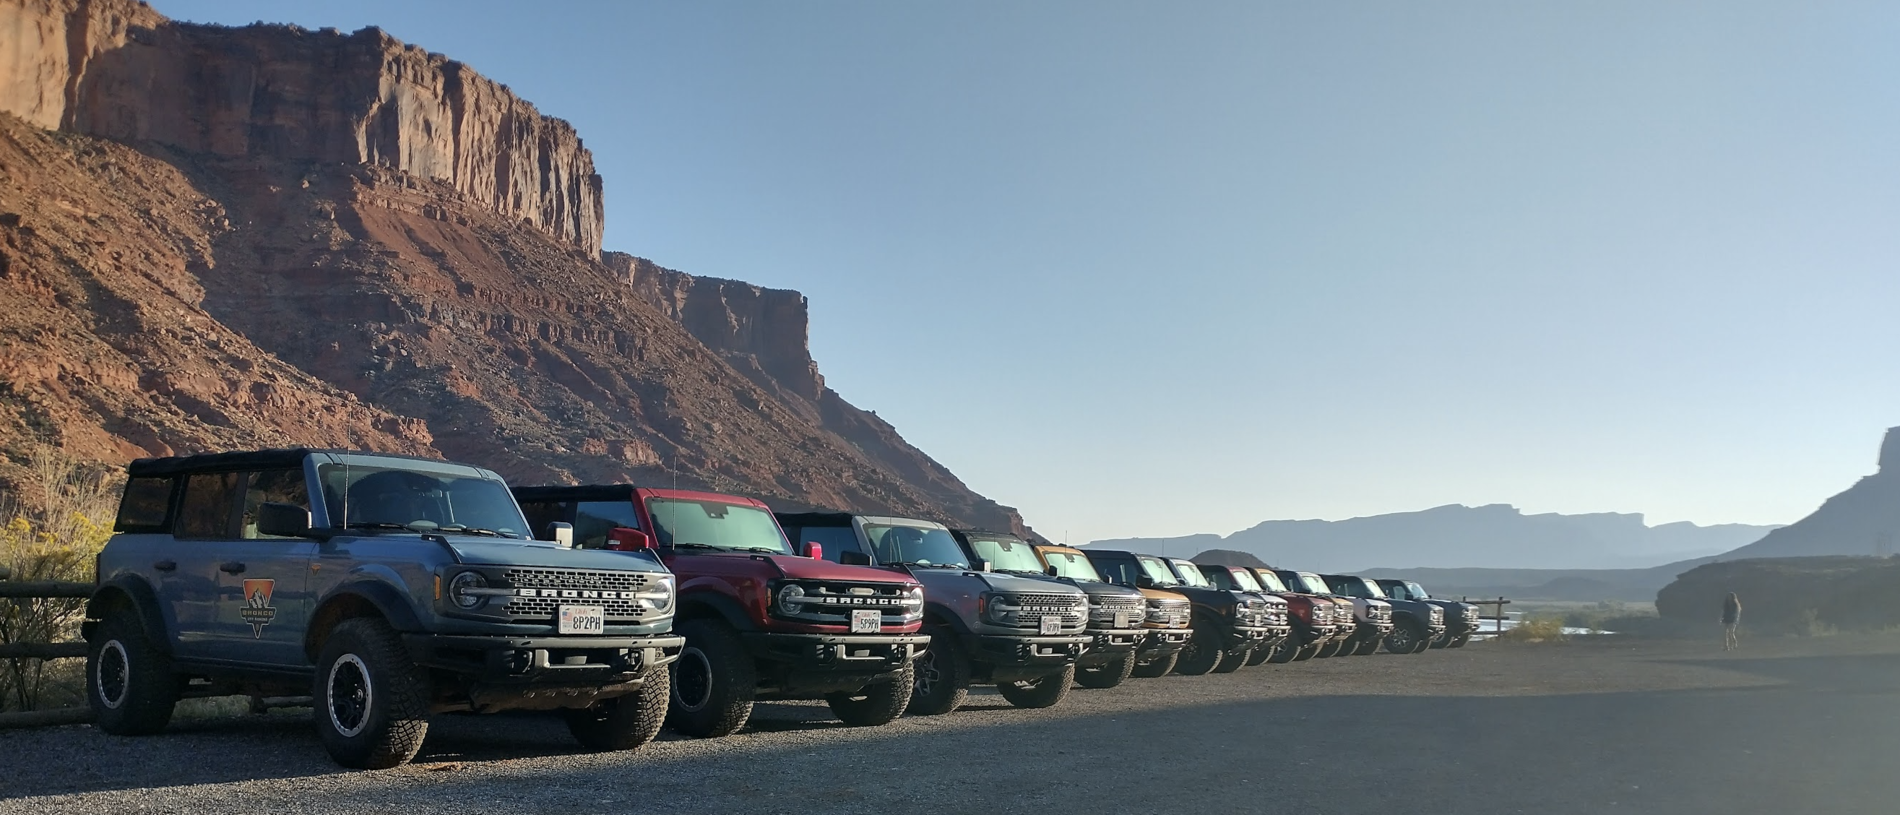 Ford Bronco Another Moab Review - strongly recommended 1633467467586